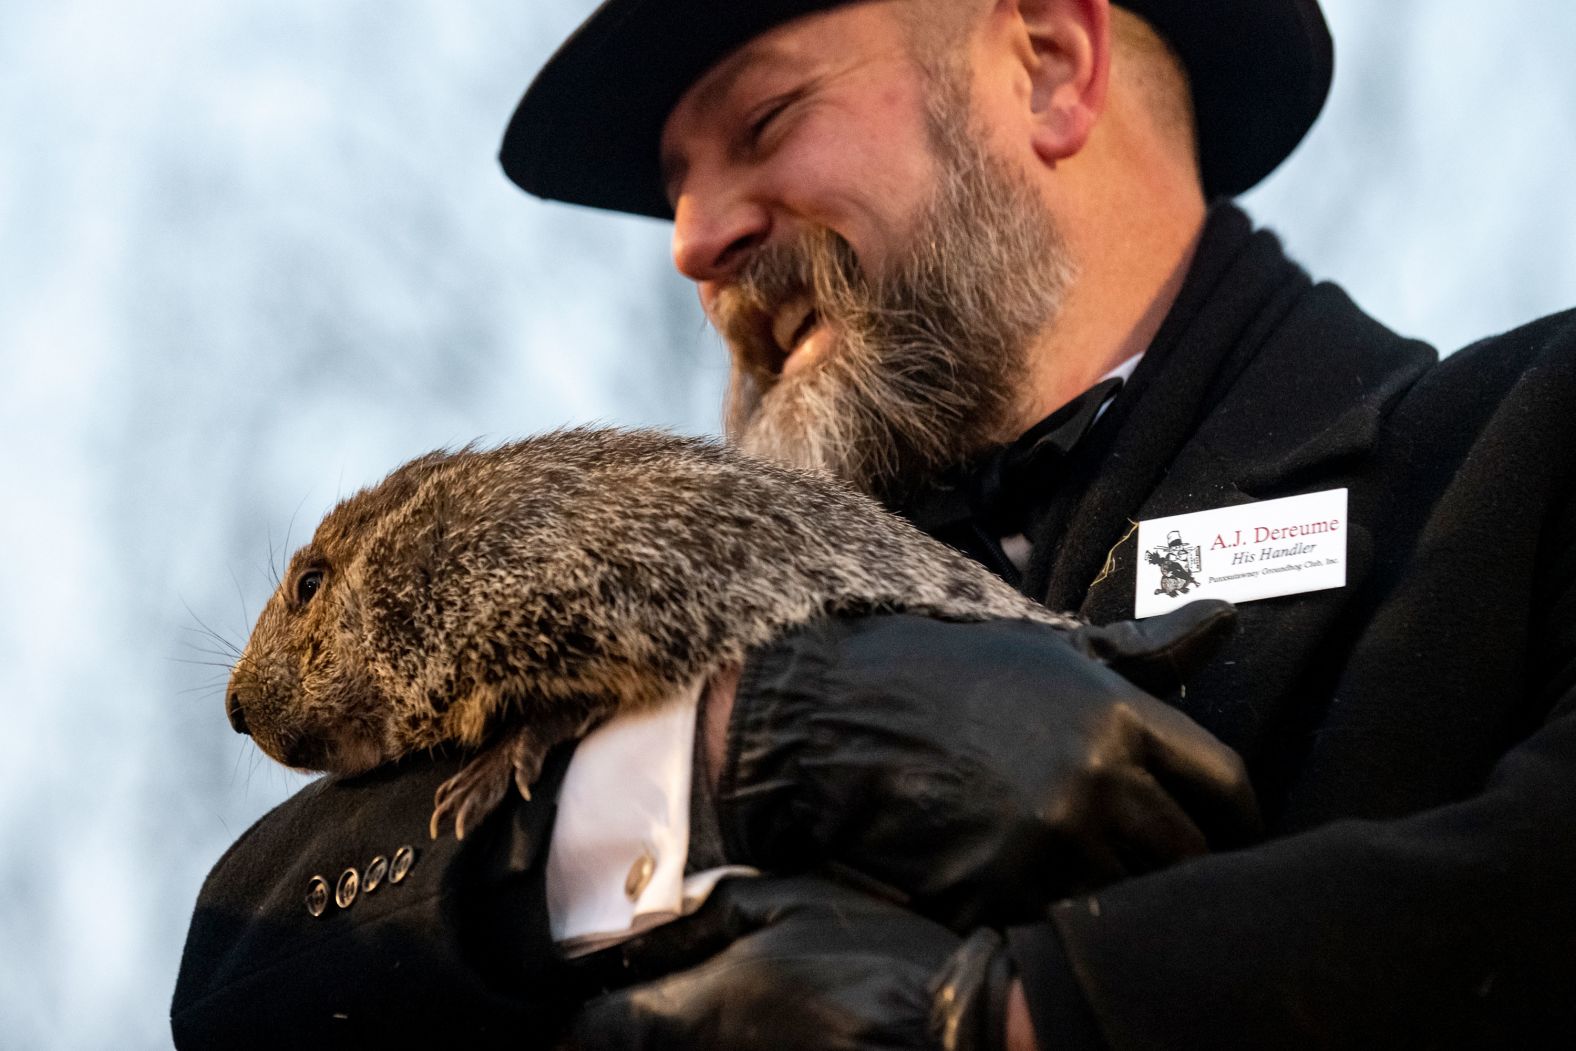 Groundhog handler AJ Dereume holds Punxsutawney Phil, the legendary groundhog weather watcher, during Groundhog Day festivities in Punxsutawney, Pennsylvania, on Thursday, February 2. <a href="index.php?page=&url=https%3A%2F%2Fwww.cnn.com%2F2023%2F02%2F02%2Fus%2Fgroundhog-day-punxsutawney-phil-2023-trnd%2Findex.html" target="_blank">Phil woke up and saw his shadow Thursday morning</a>, calling for six more weeks of winter.